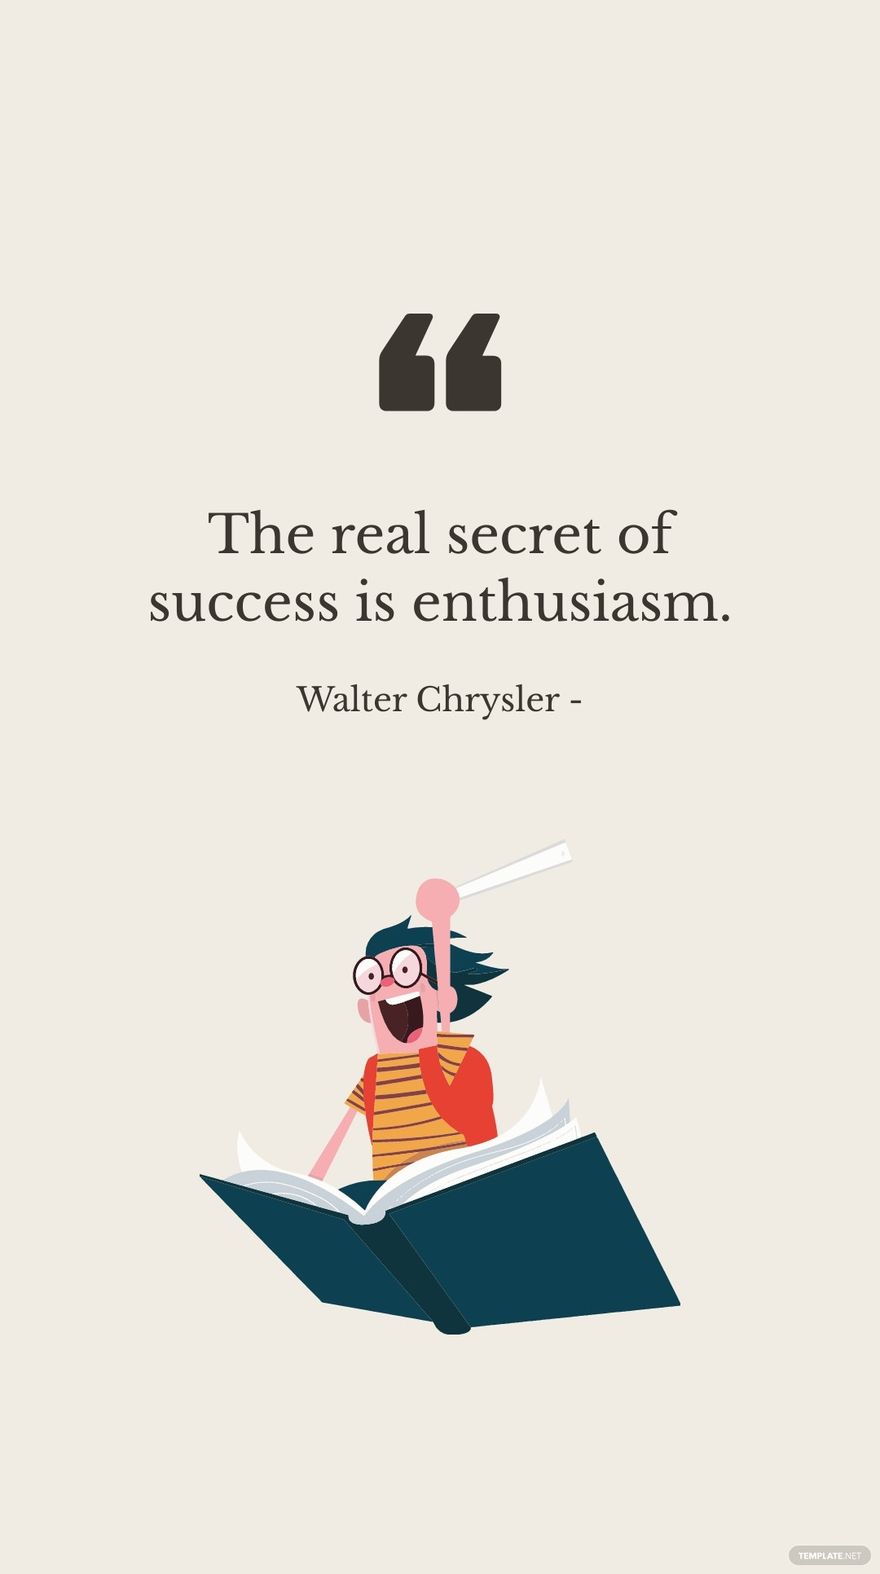 Walter Chrysler - The real secret of success is enthusiasm.